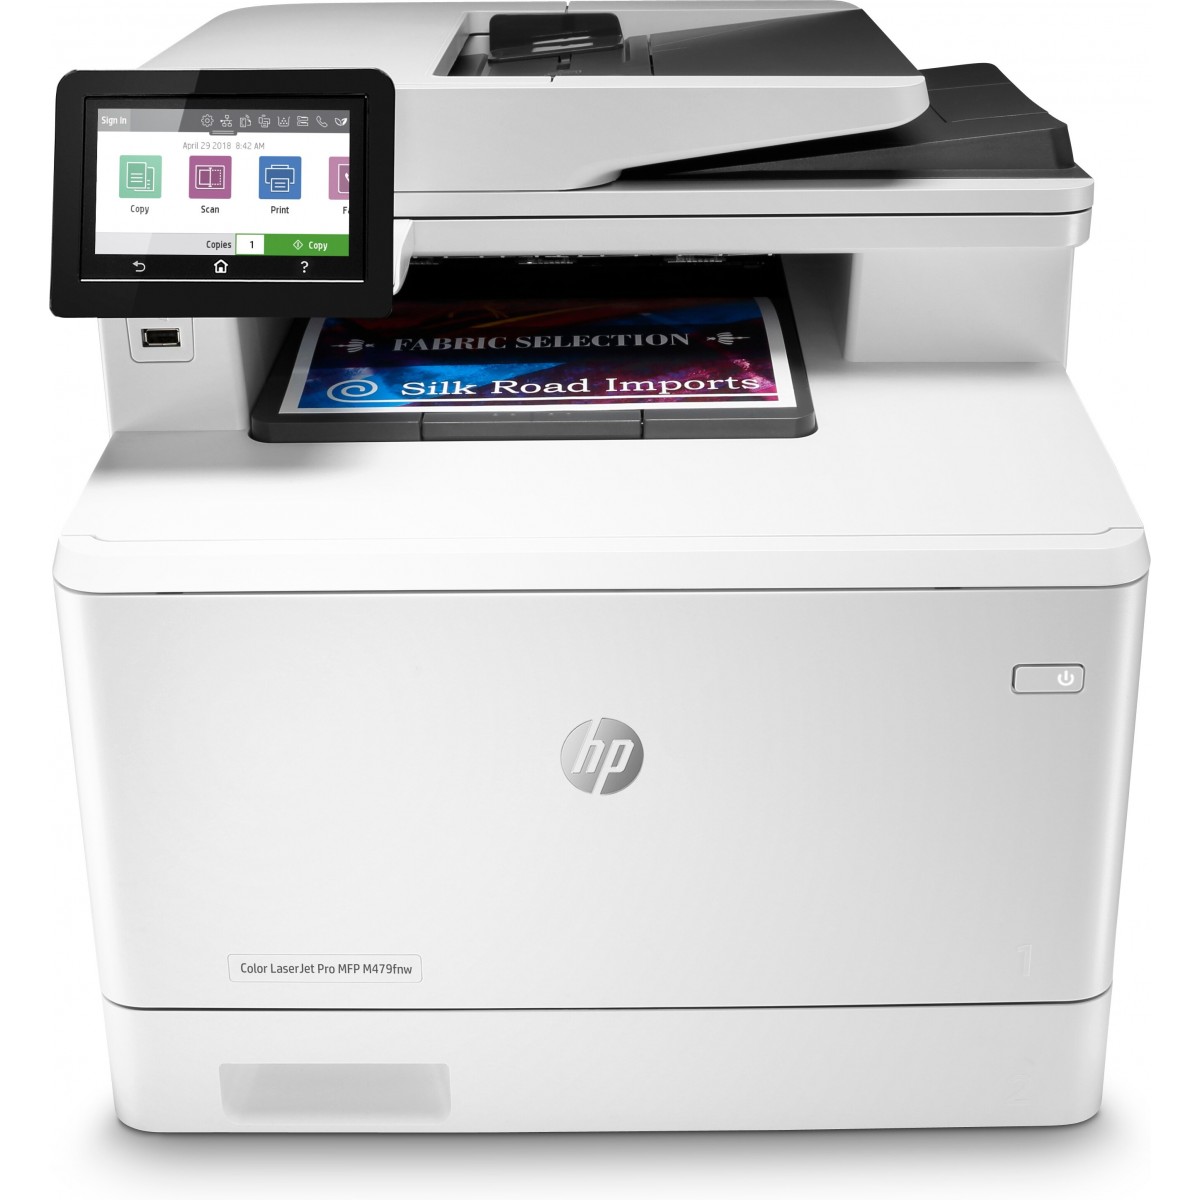 HP Color LaserJet Pro M479fnw - Laser - Colour printing - 600 x 600 DPI - Colour copying - A4 - Direct printing